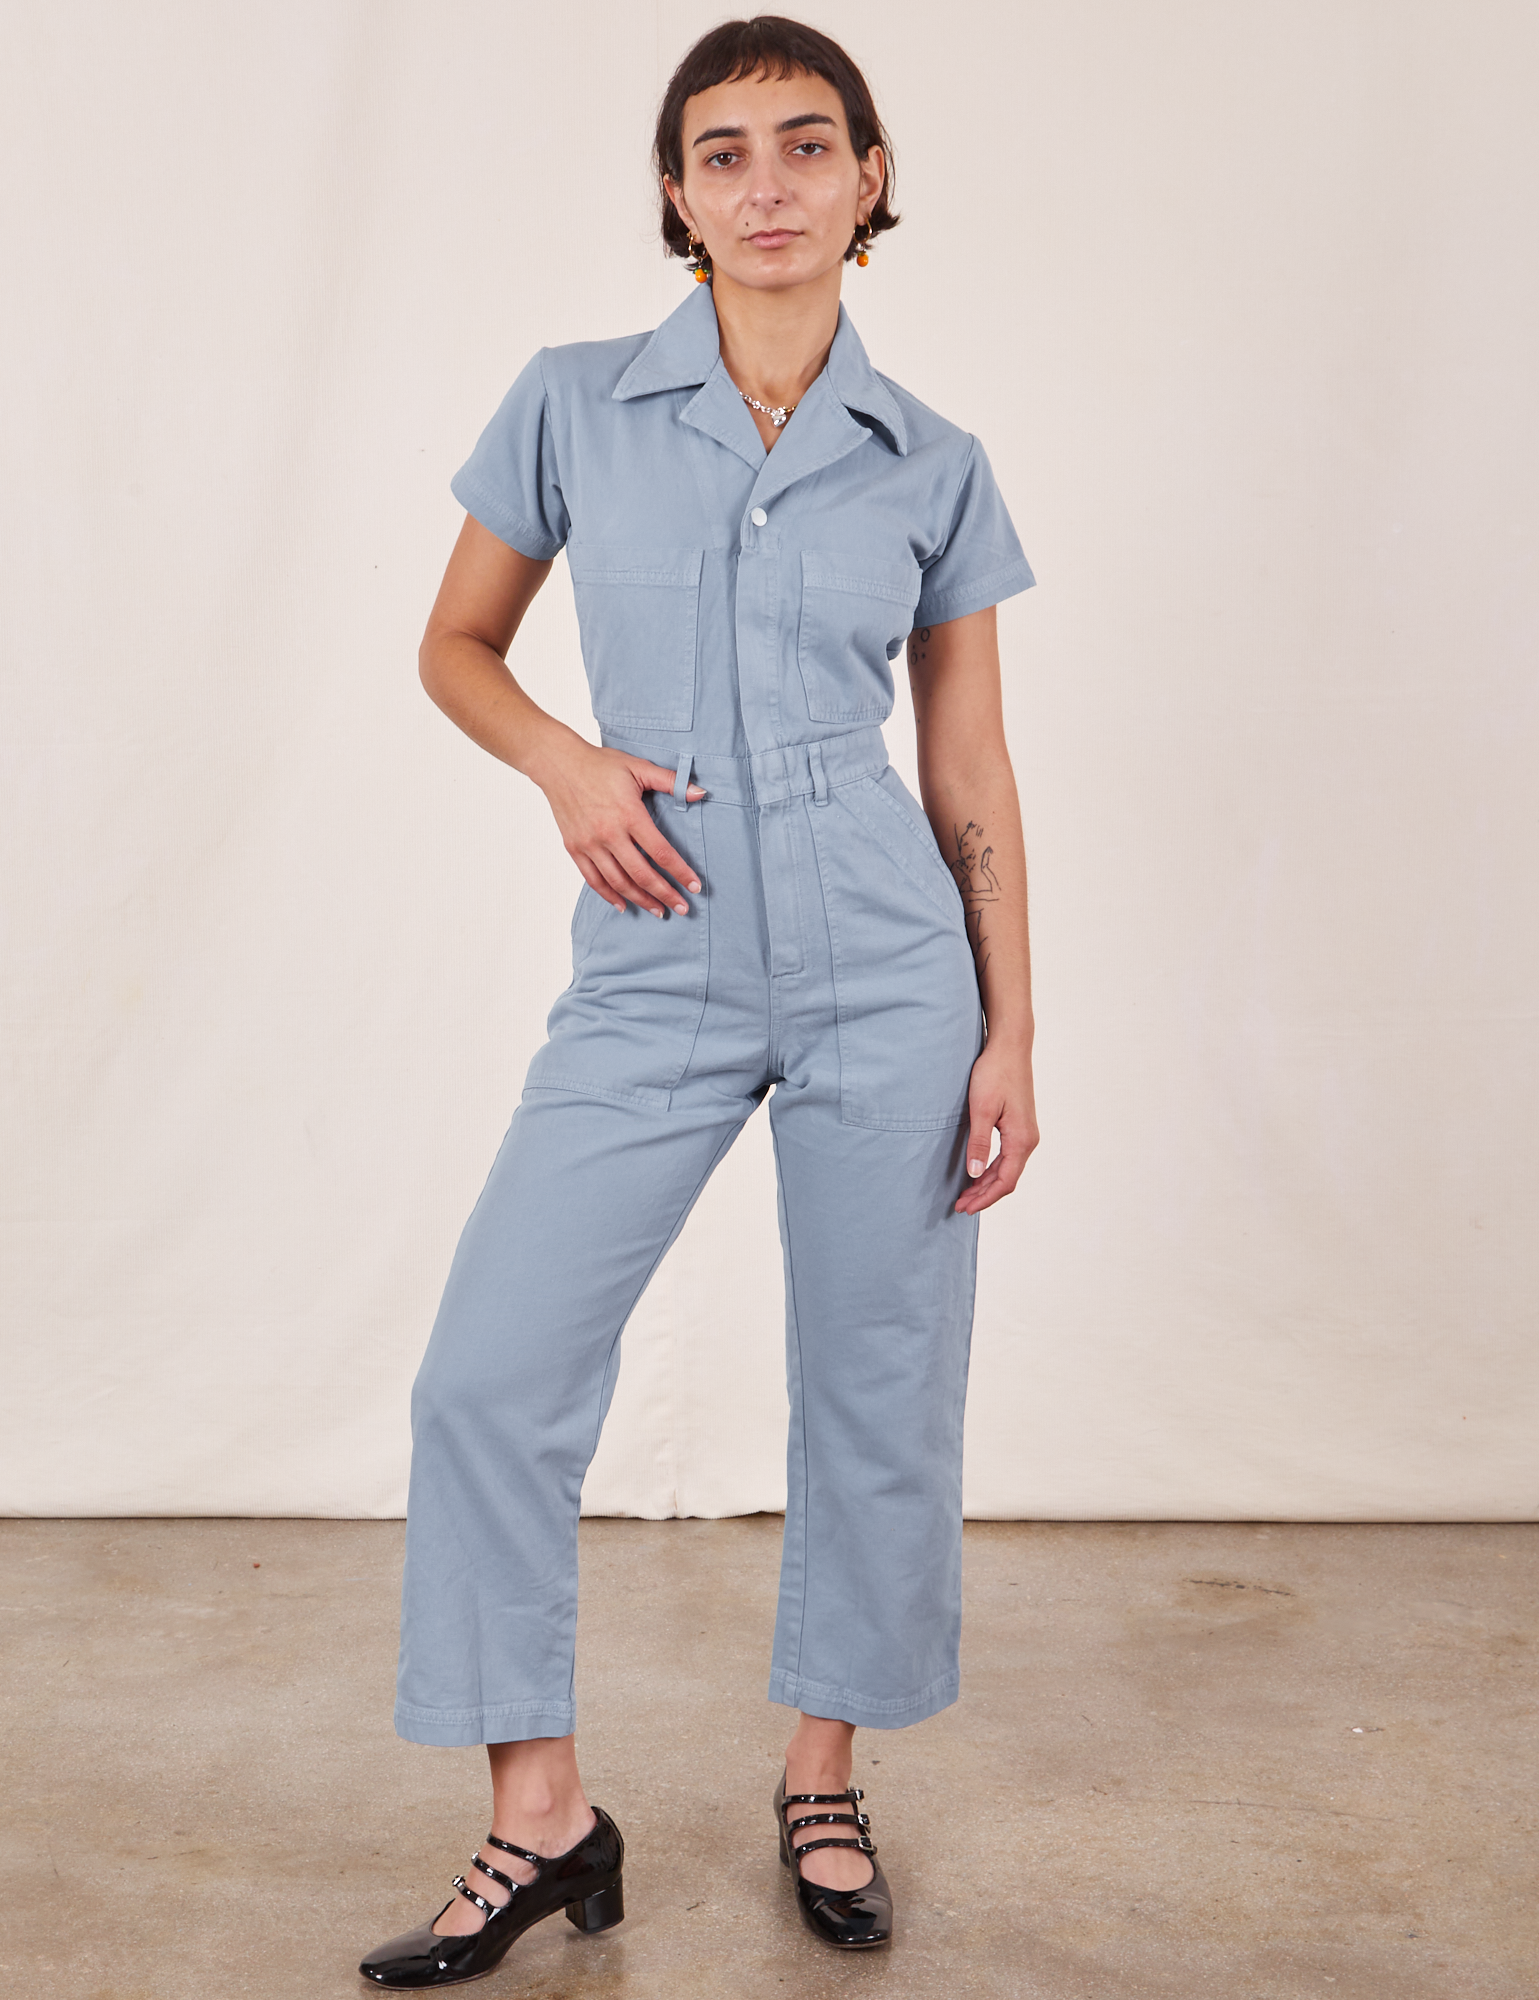 Sexy Blue Denim Petite Denim Jumpsuit With Deep V Spaghetti Straps And  Backless Design For Women From Beasy112, $29.81 | DHgate.Com